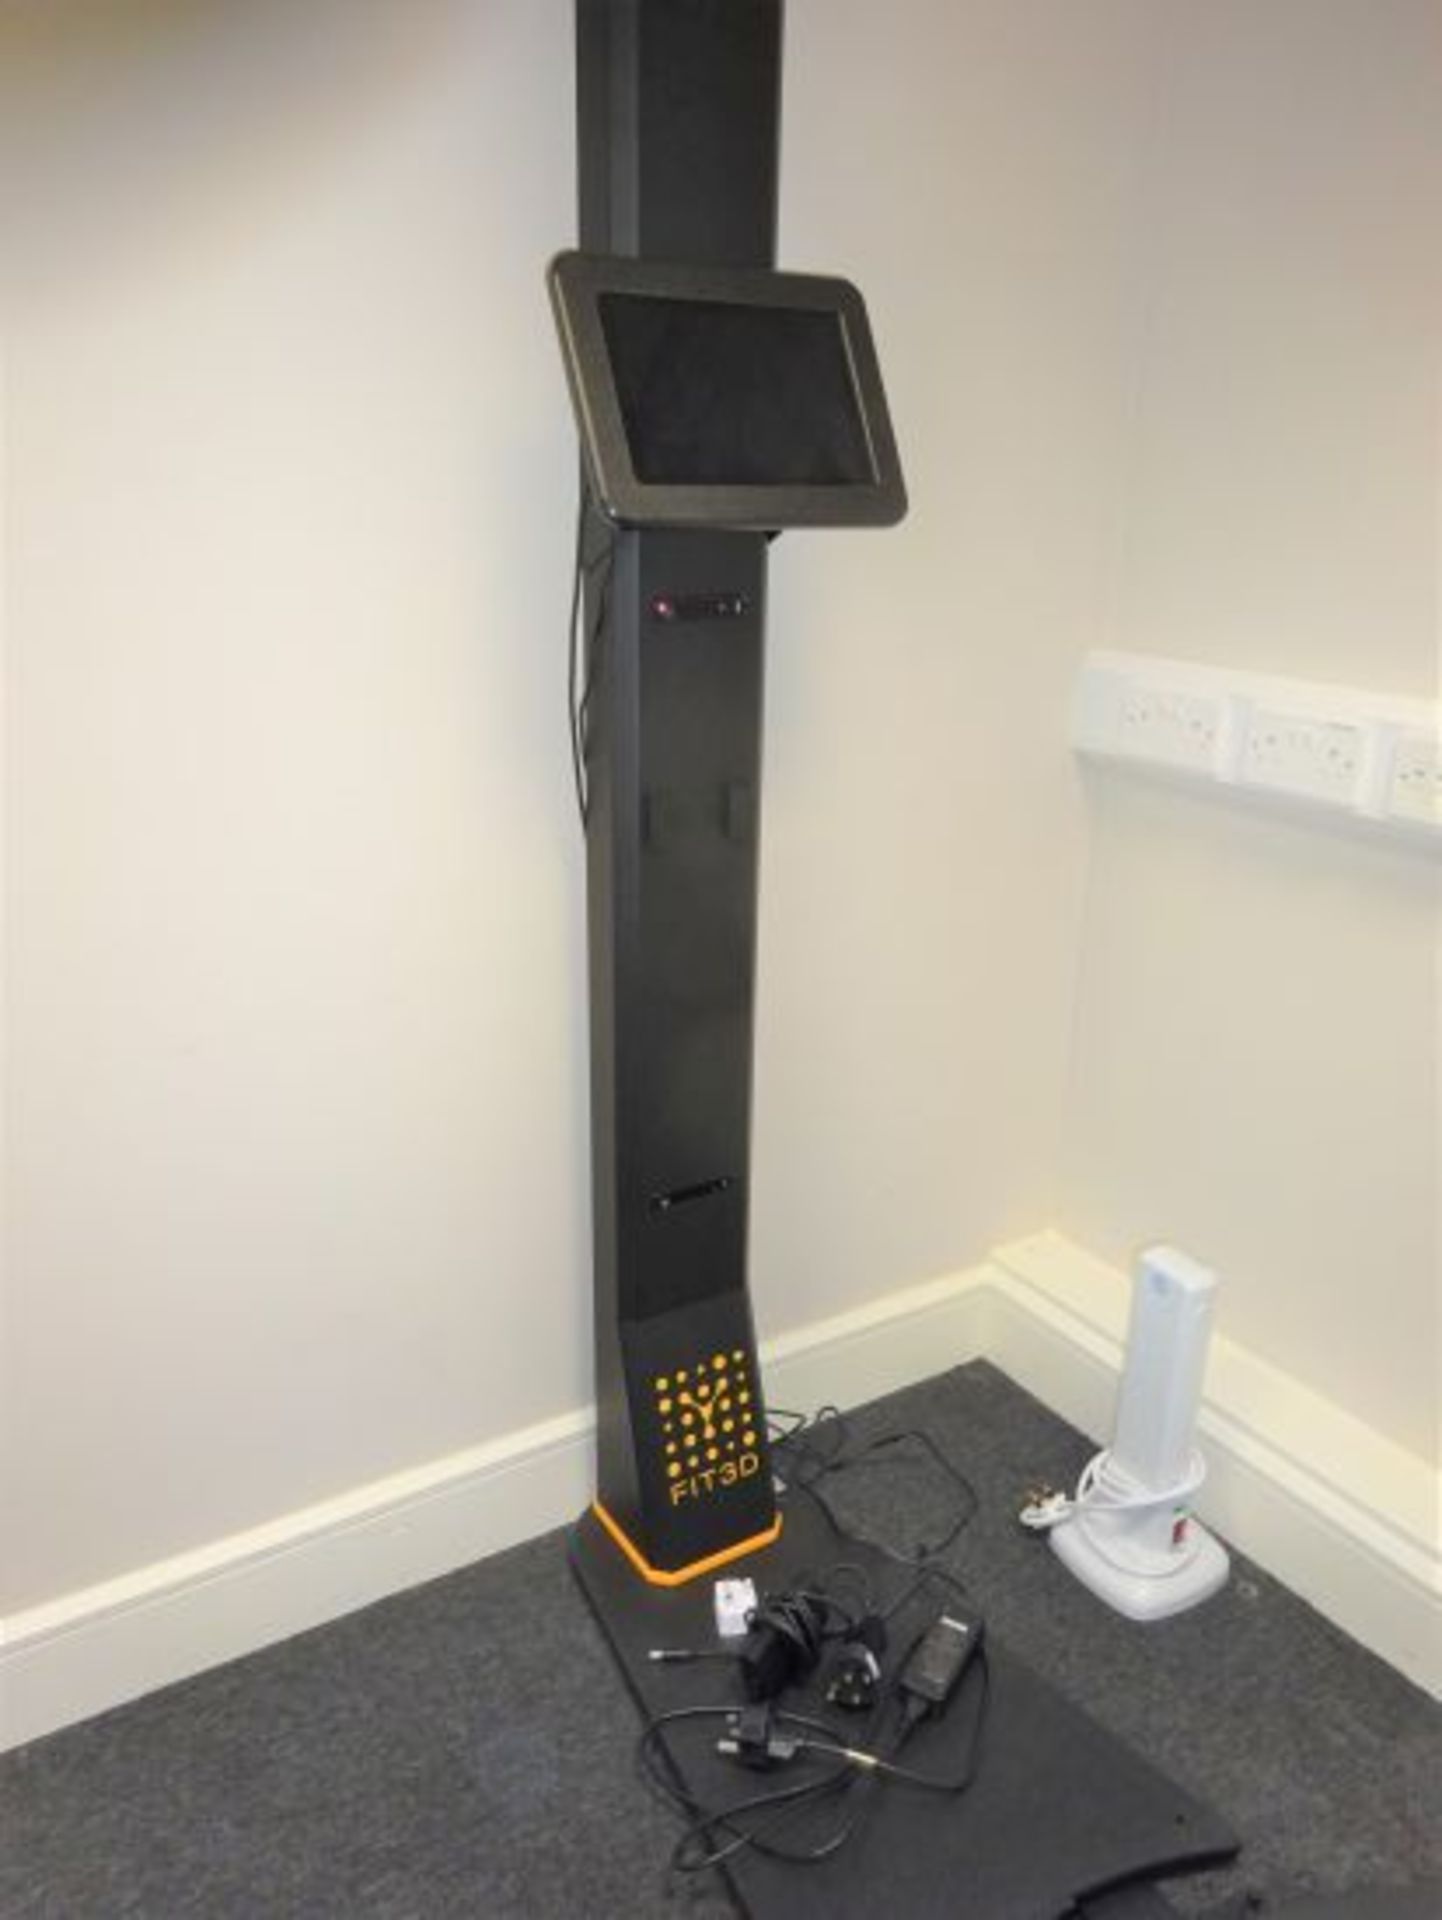 Fit 3D Personal Scanner with Attached Turntable, Flatscreen Control System. - Image 2 of 2